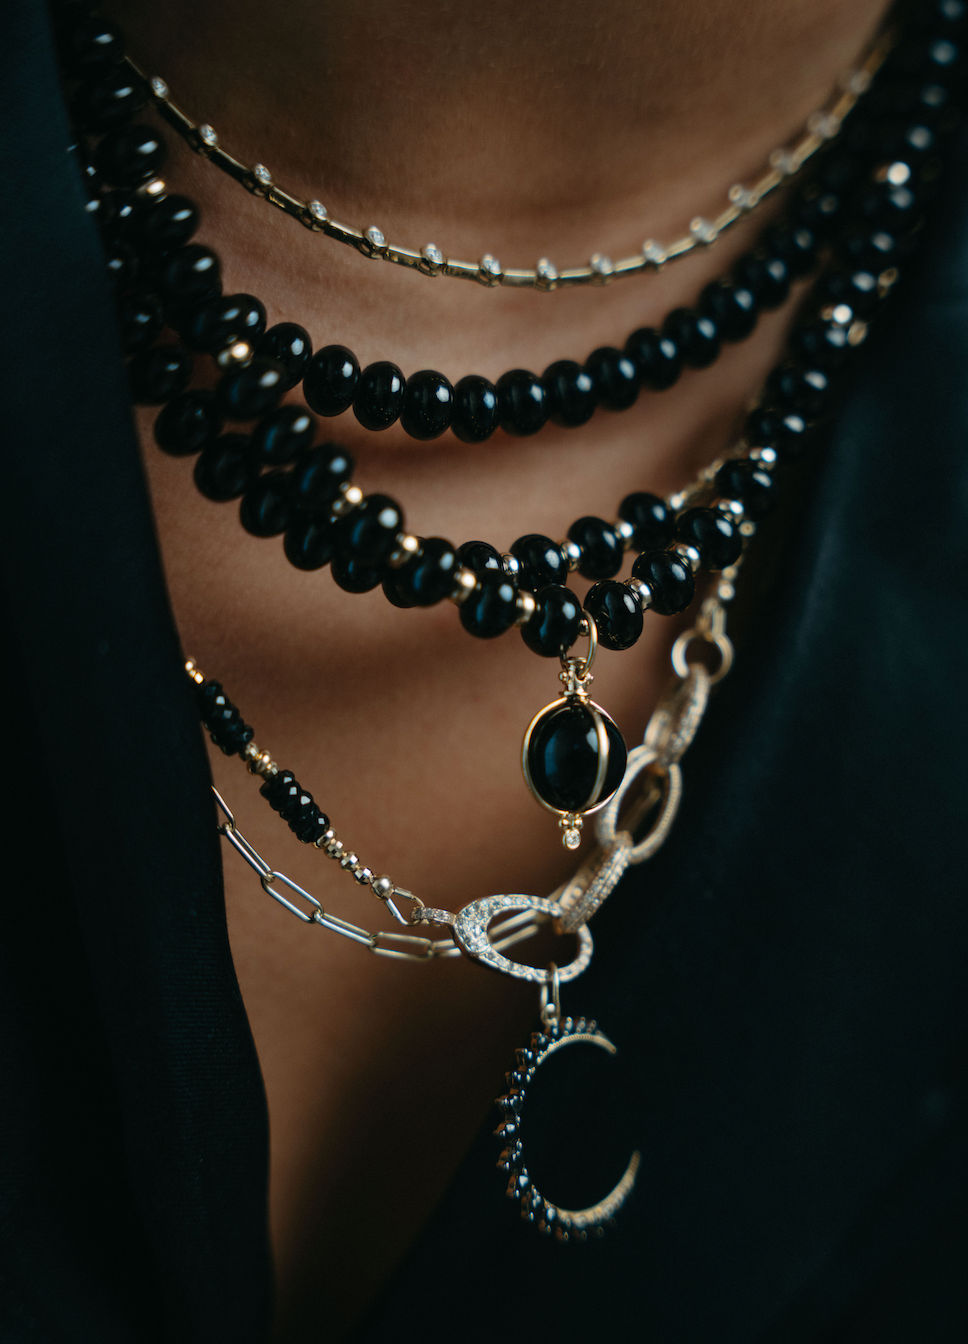 BLACK SPINEL AND DIAMOND LINK NECKLACE